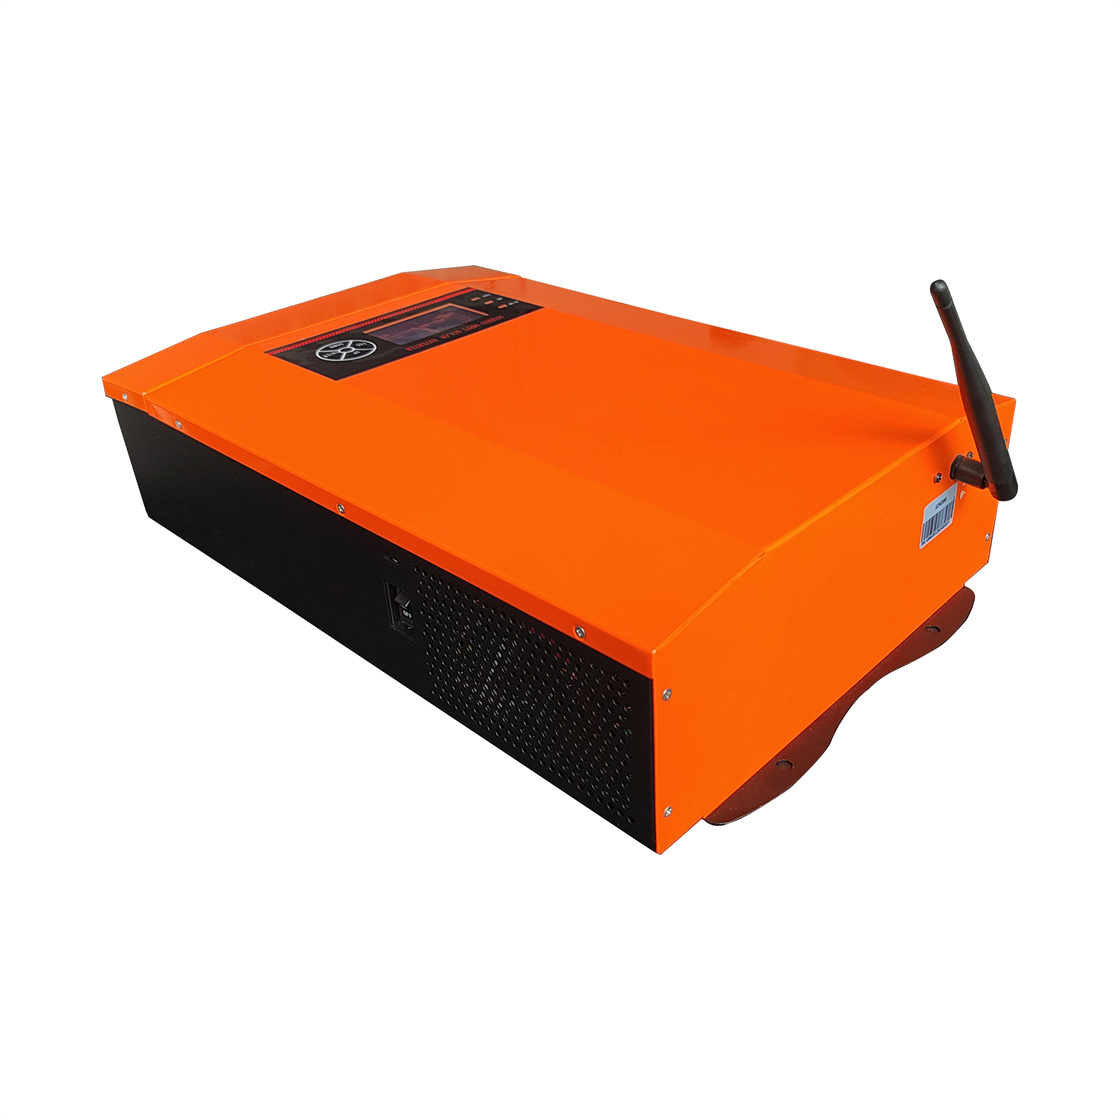 MPPT 3500w solar energy hybrid high frequency pure sine wave inverter and charger with WIFI Monitor for wild camping